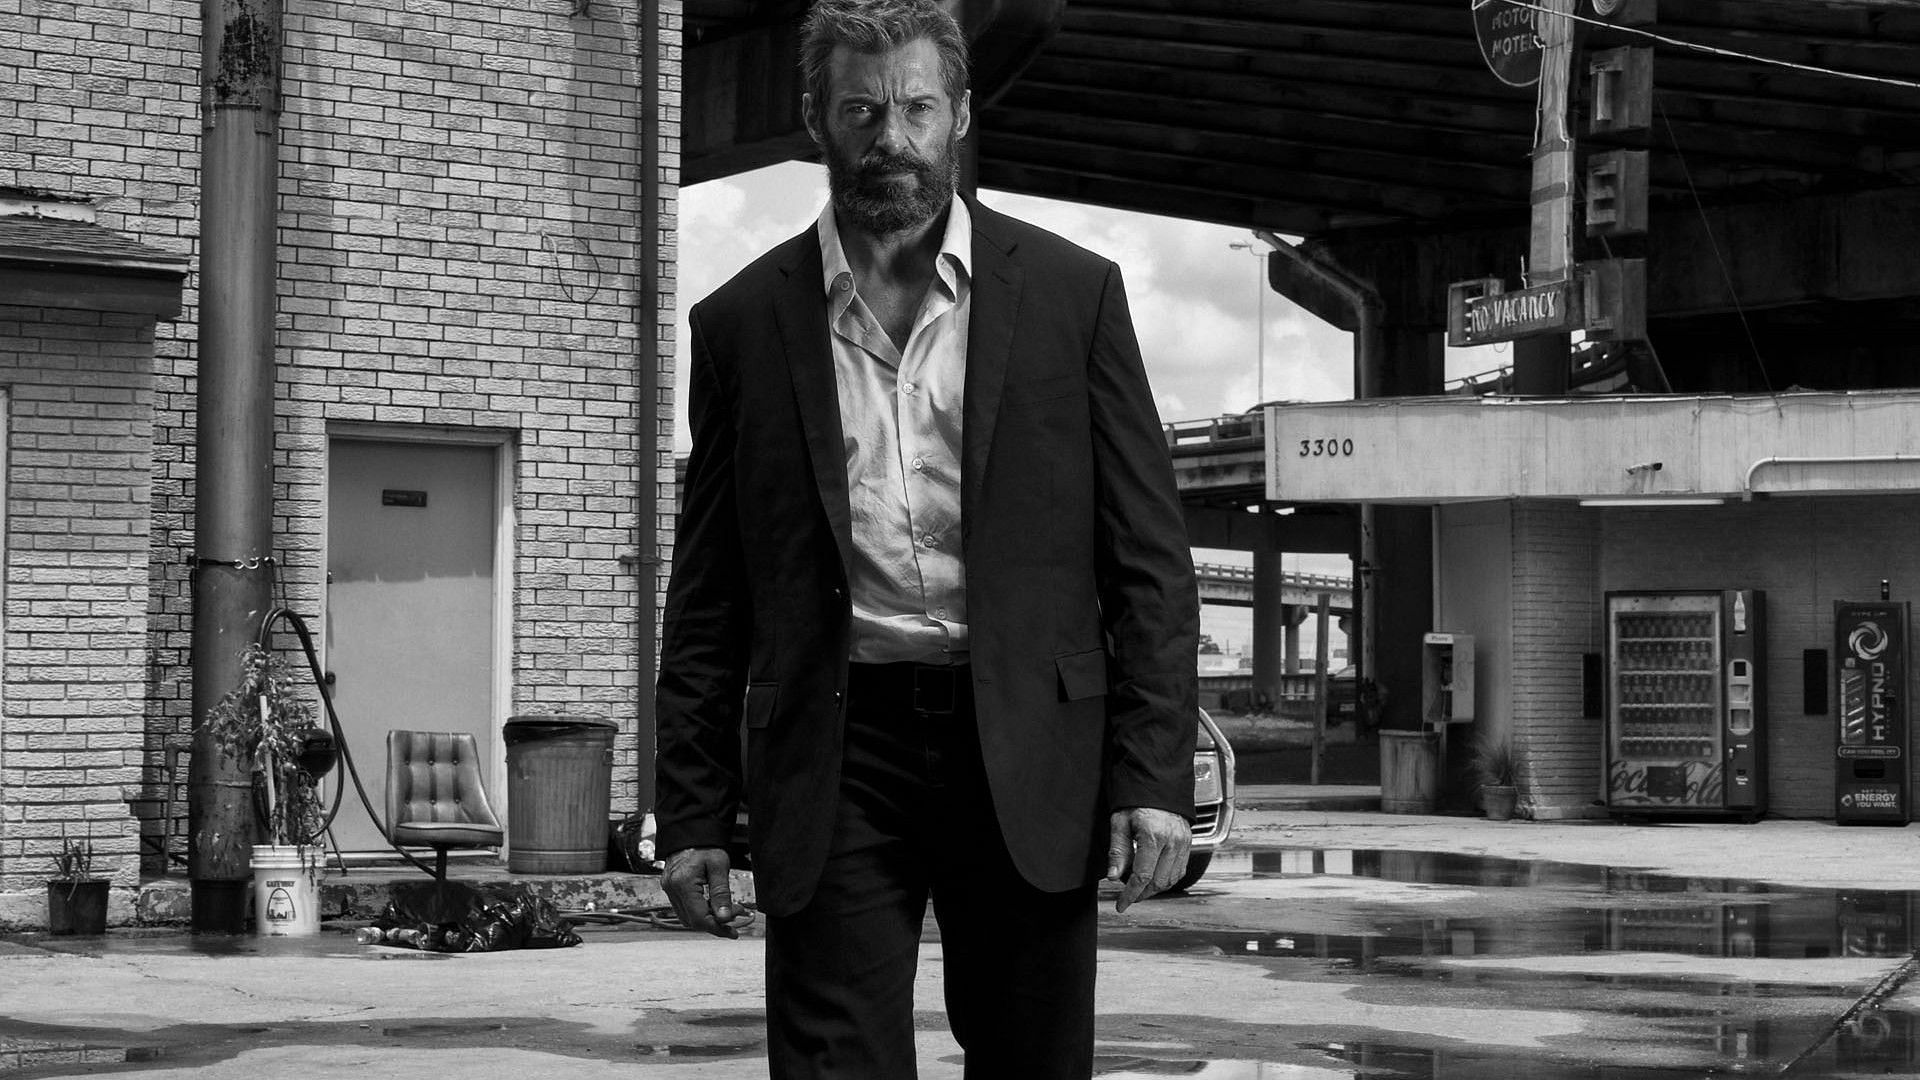 Explored: Why is Logan aka Wolverine's death being discussed on Twitter  after Ryan Reynolds' Deadpool 3 X Hugh Jackman announcement?